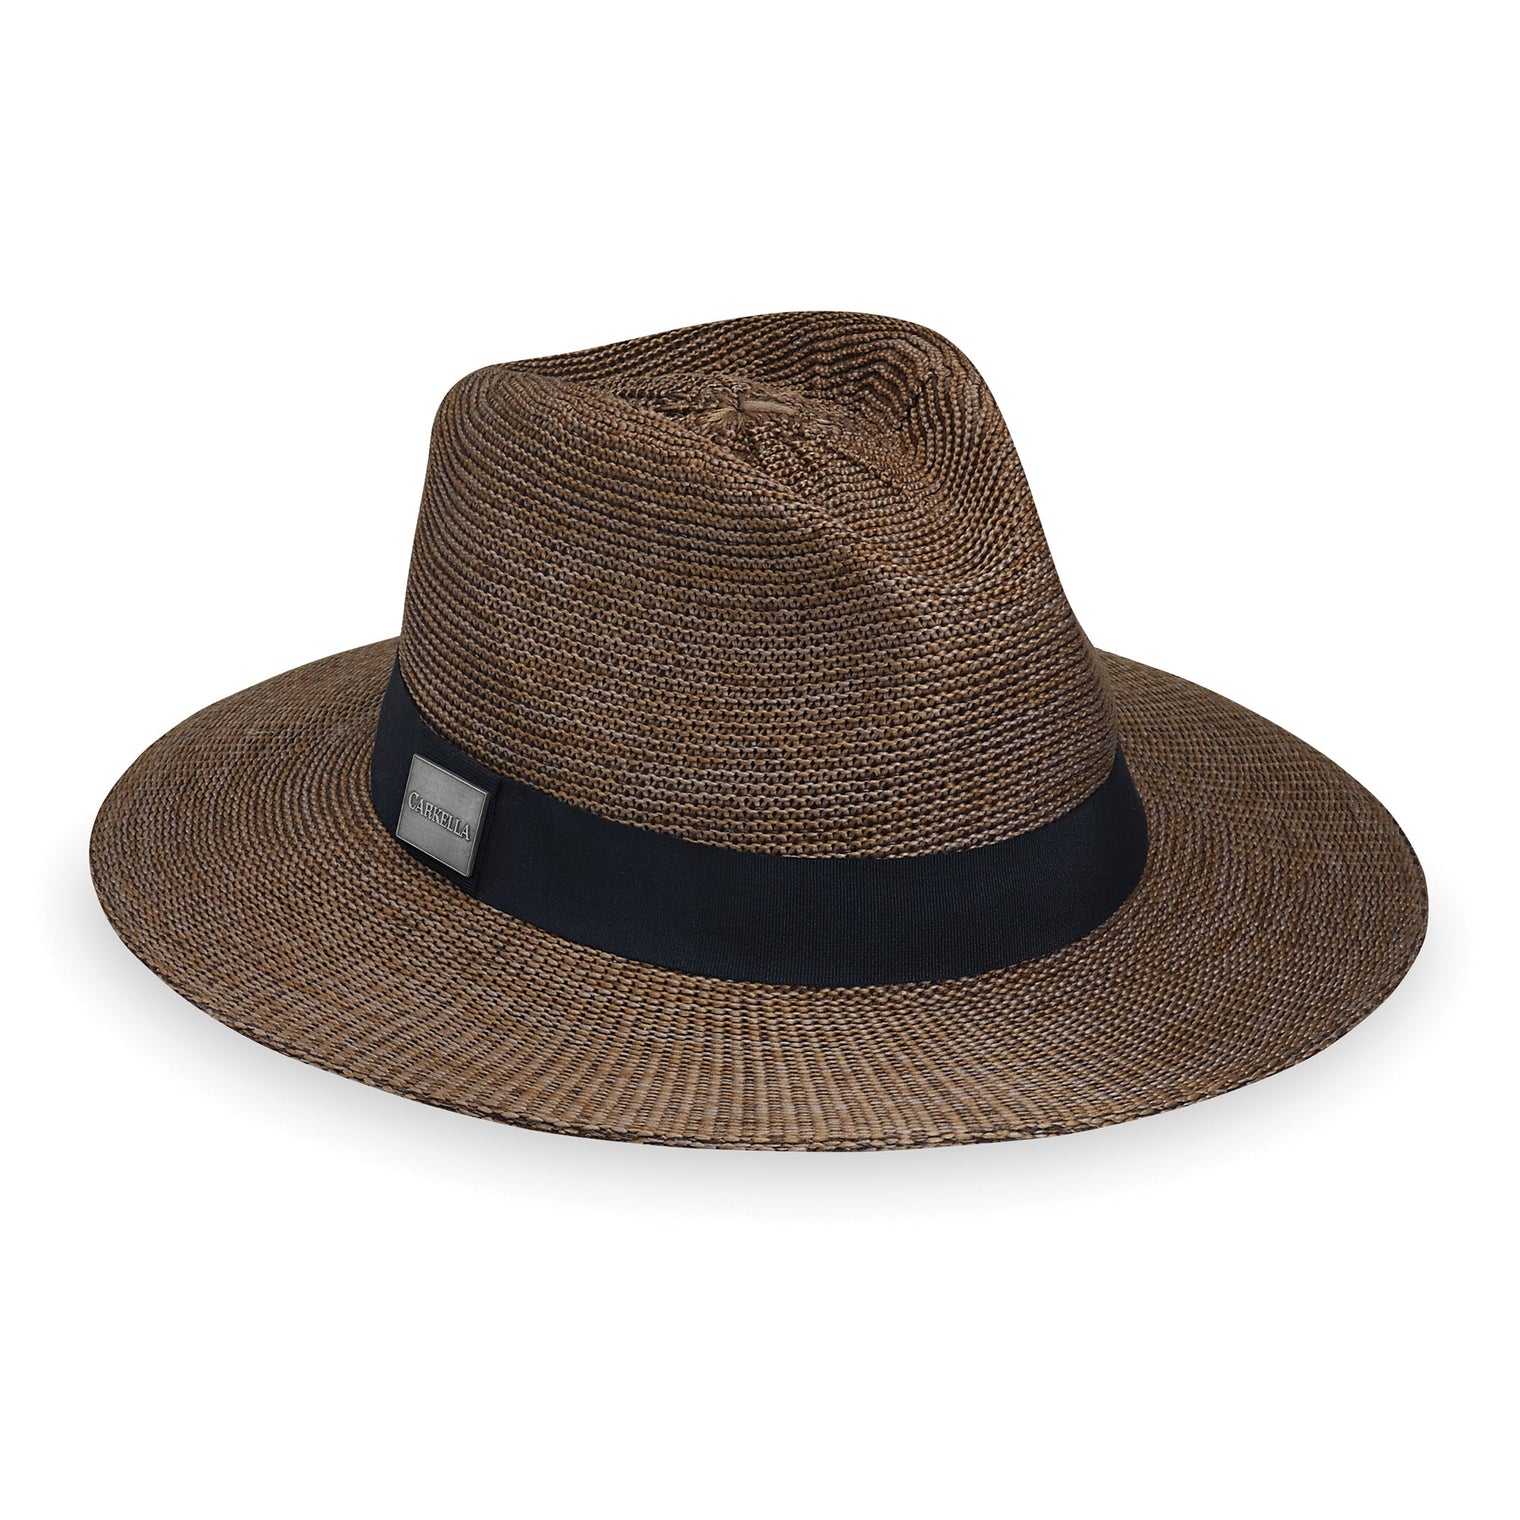 Featuring Front of Unisex Fedora Style Packable Parker UPF Sun Hat in Suede from Carkella by Wallaroo